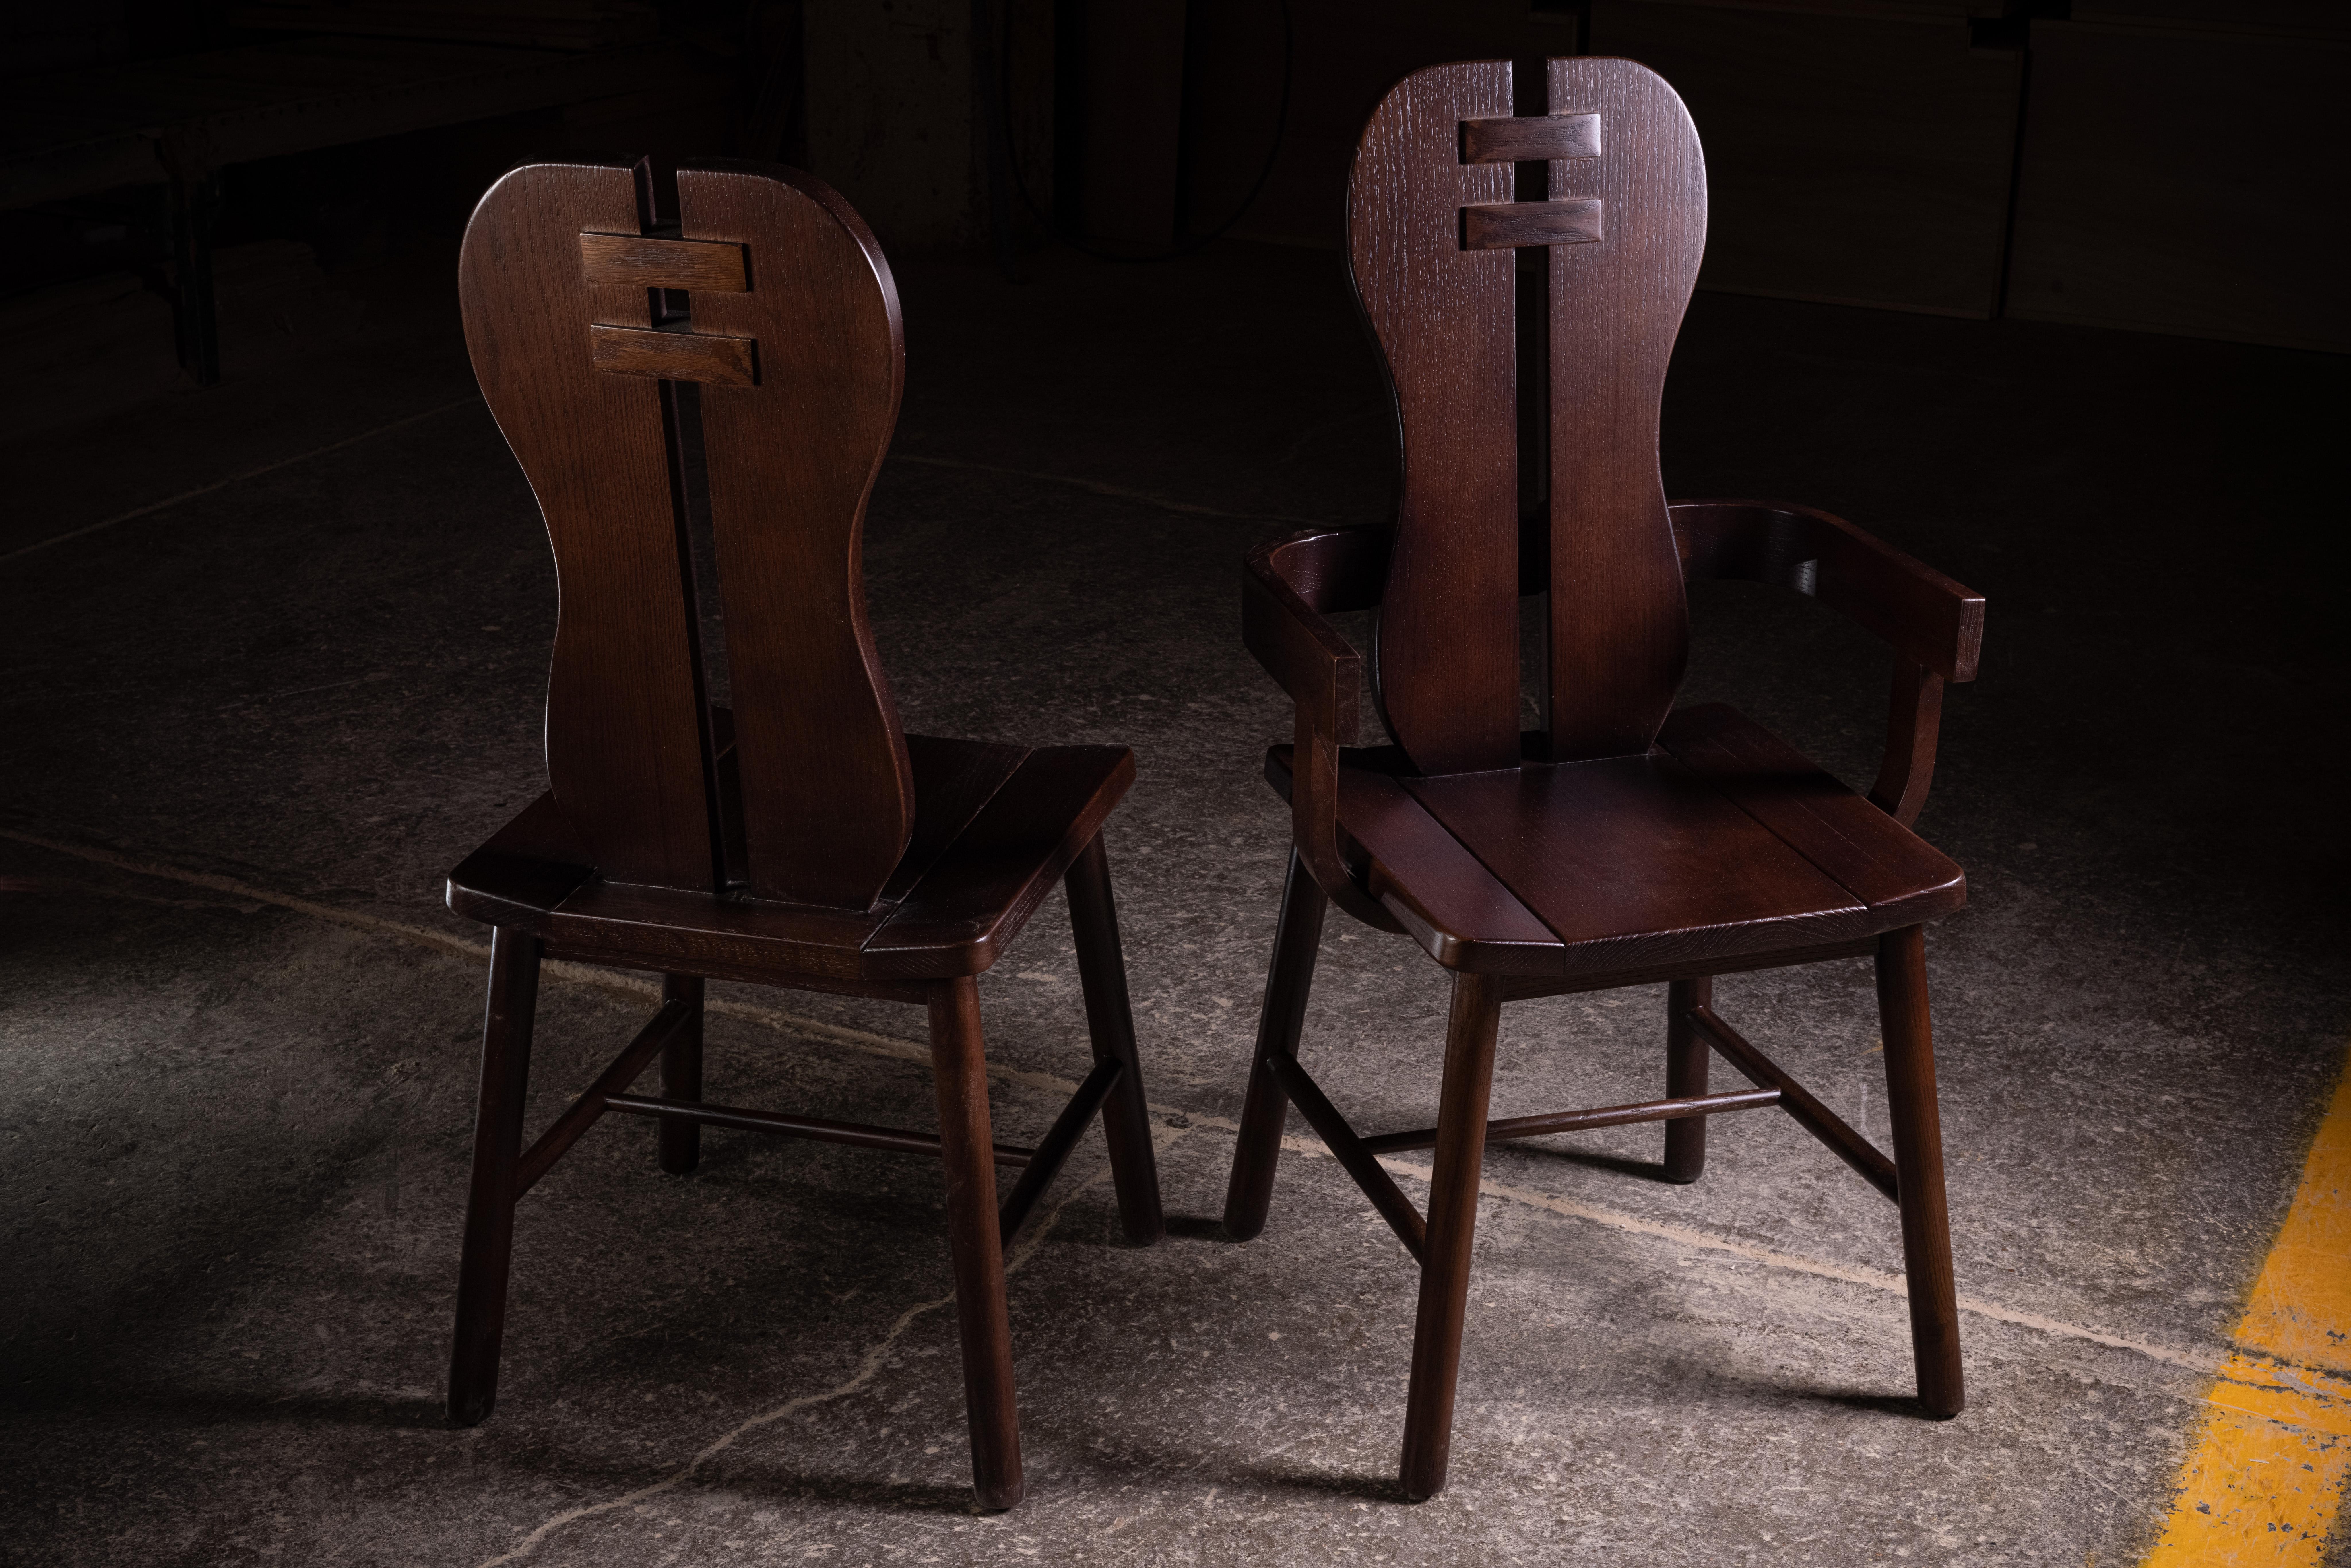 Homage to our favorite chairs.
Brutalist mid-century, Oak De Puydt Homage chairs.